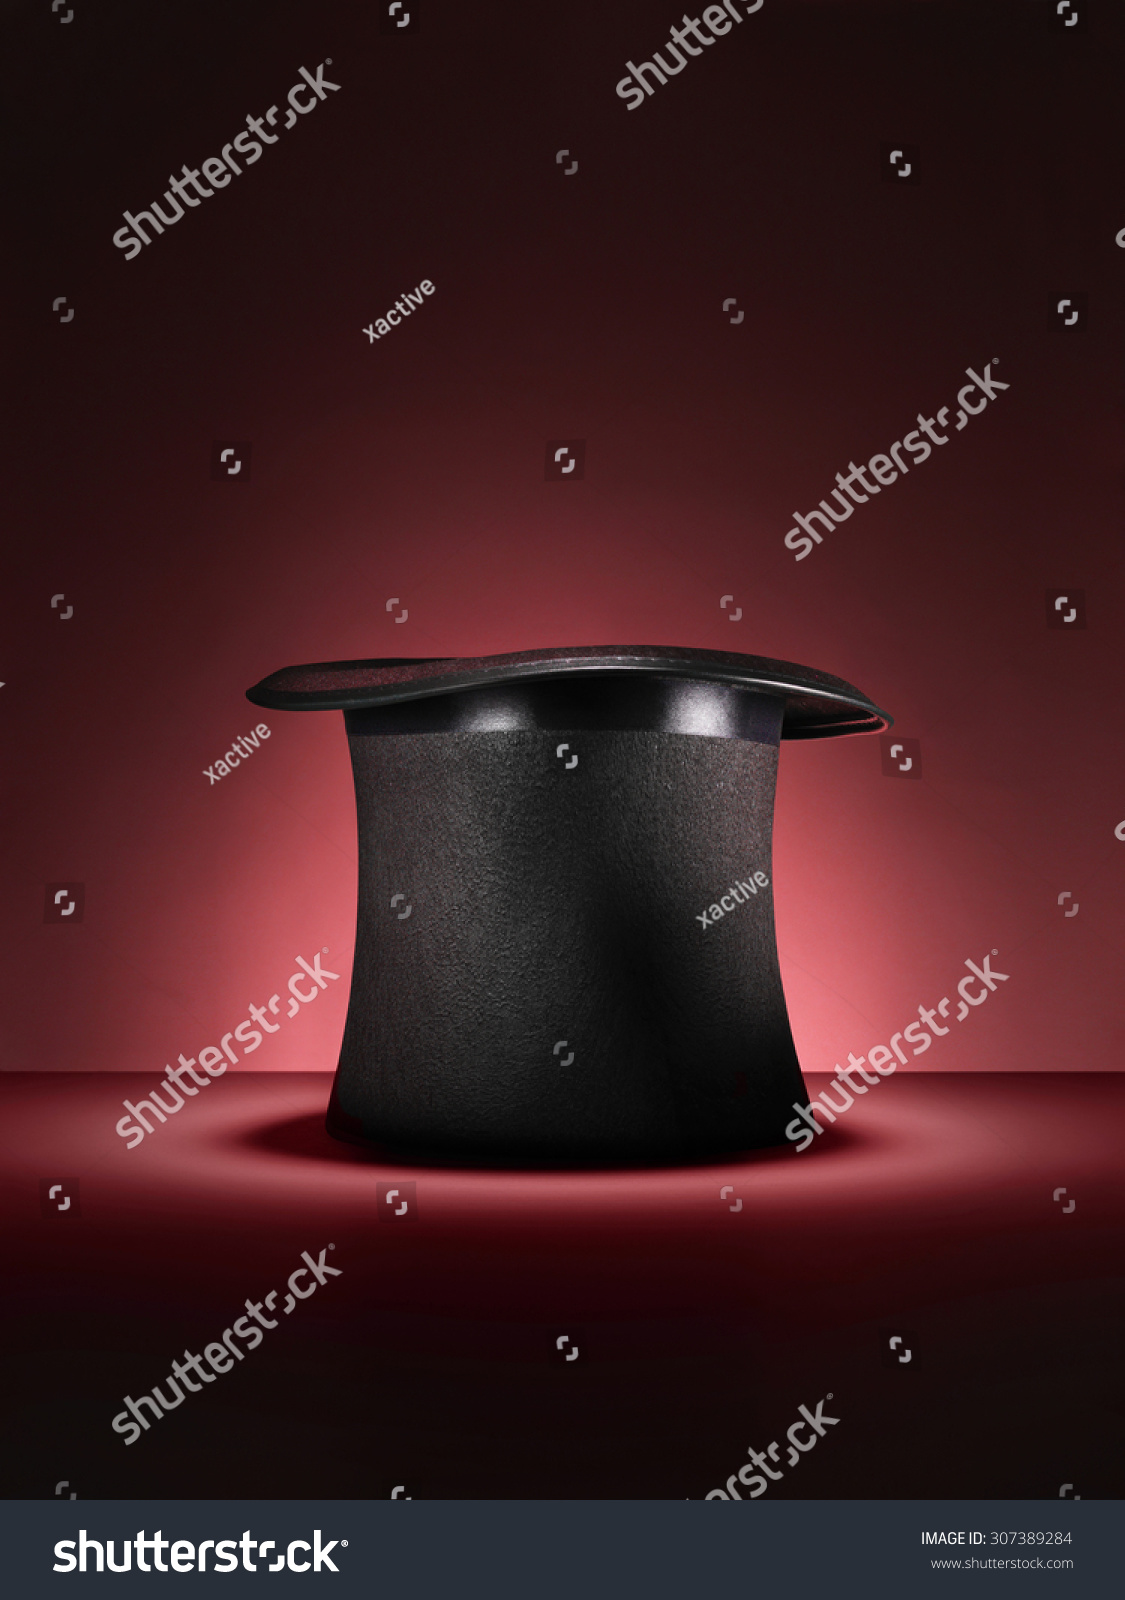 Shot of a traditional magicians style top hat set up for a trick or illusion on a red background with space left for the designer to add an object or type.  #307389284